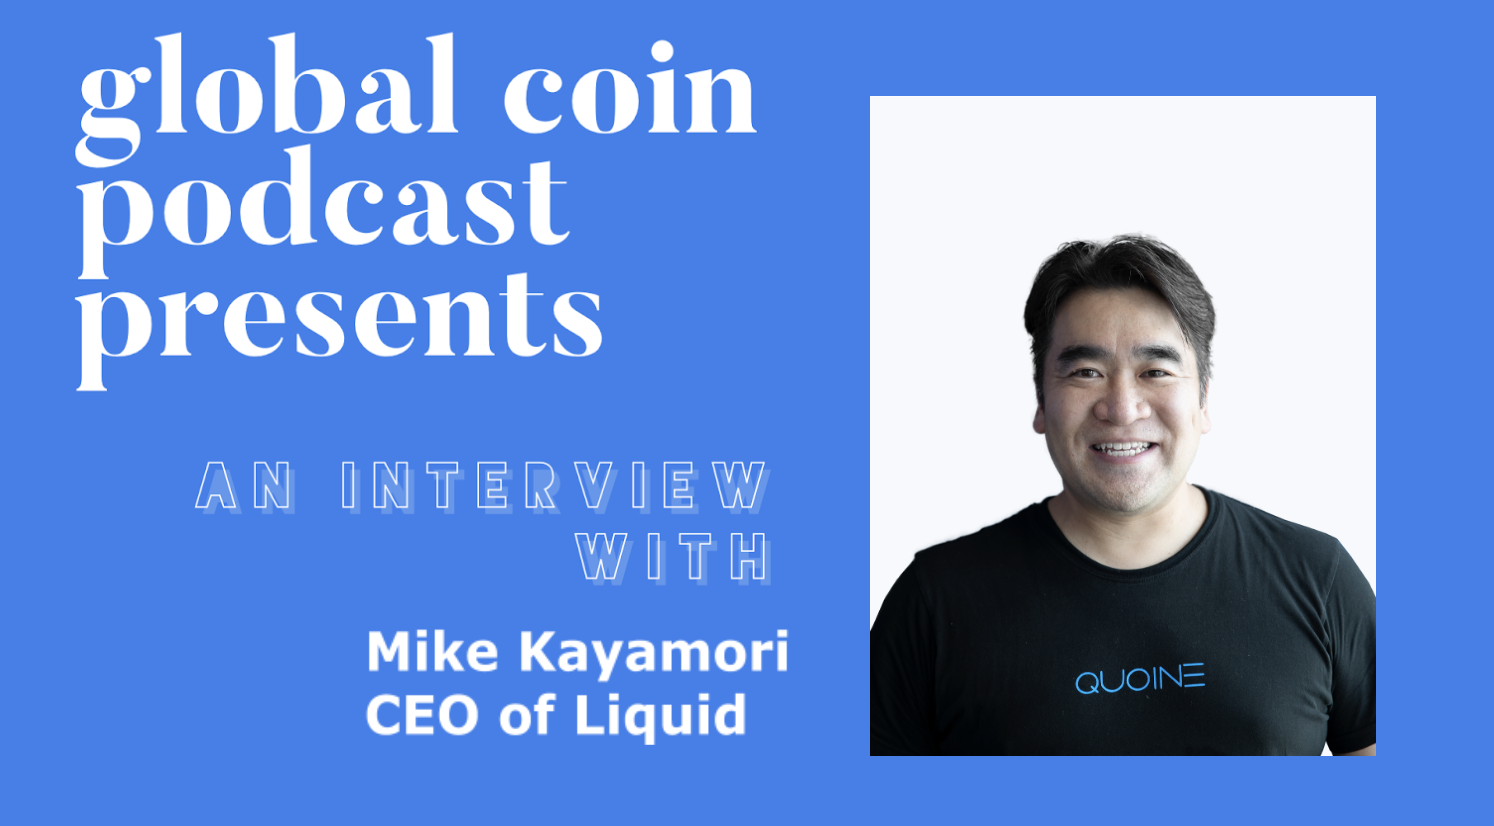 Interview Transcript with Liquid CEO Mike Kayamori